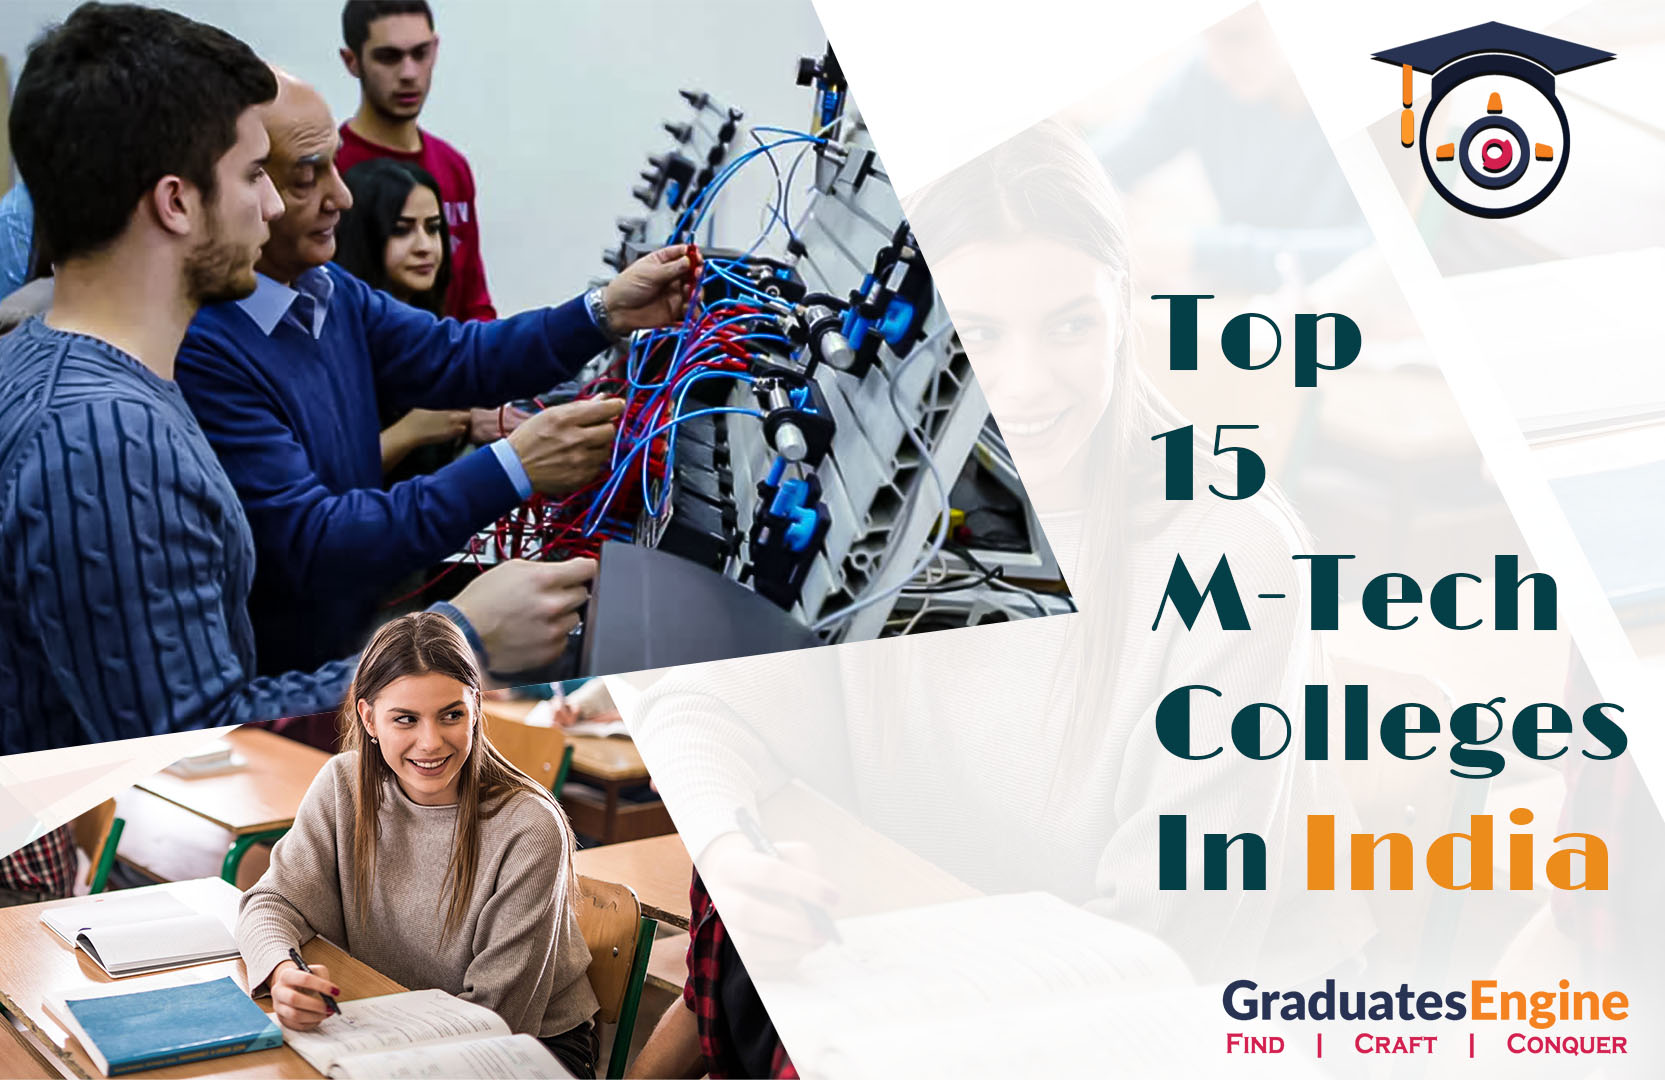 Top Fifteen M-Tech Colleges In India | Top M-Tech Colleges in India